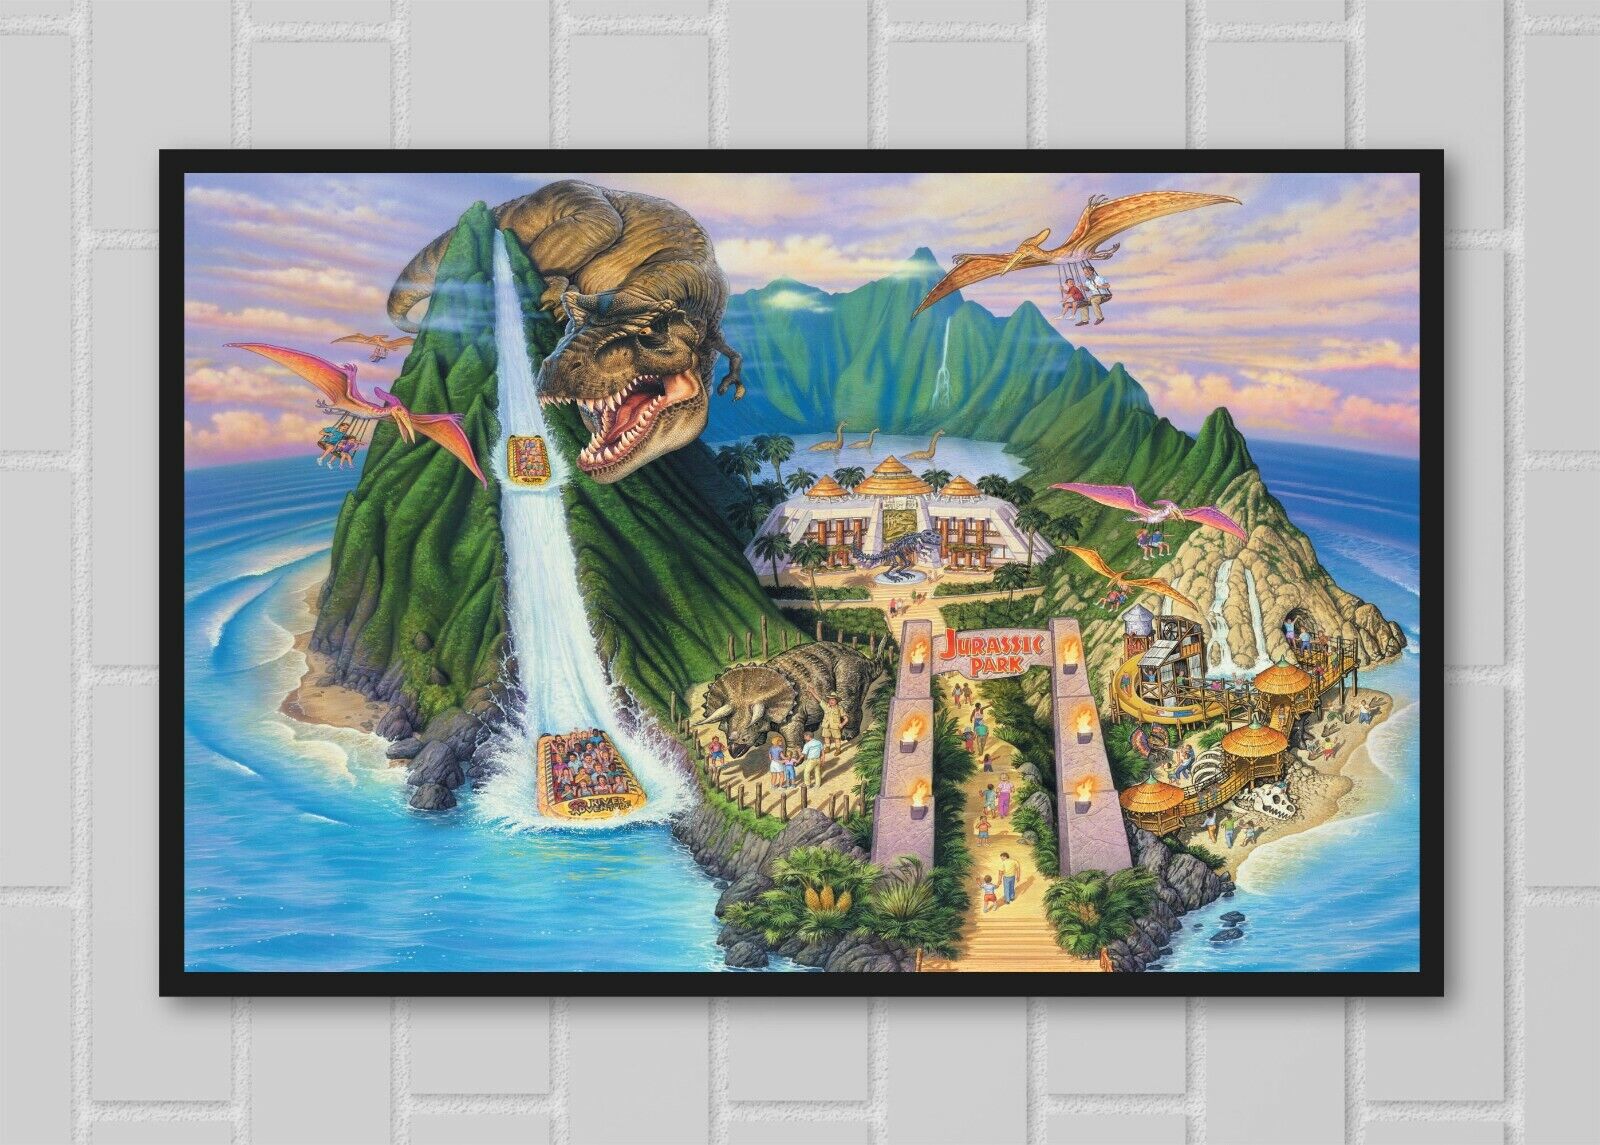 Jurassic Park River Adventure Discovery Center Islands of Adventure Poster 